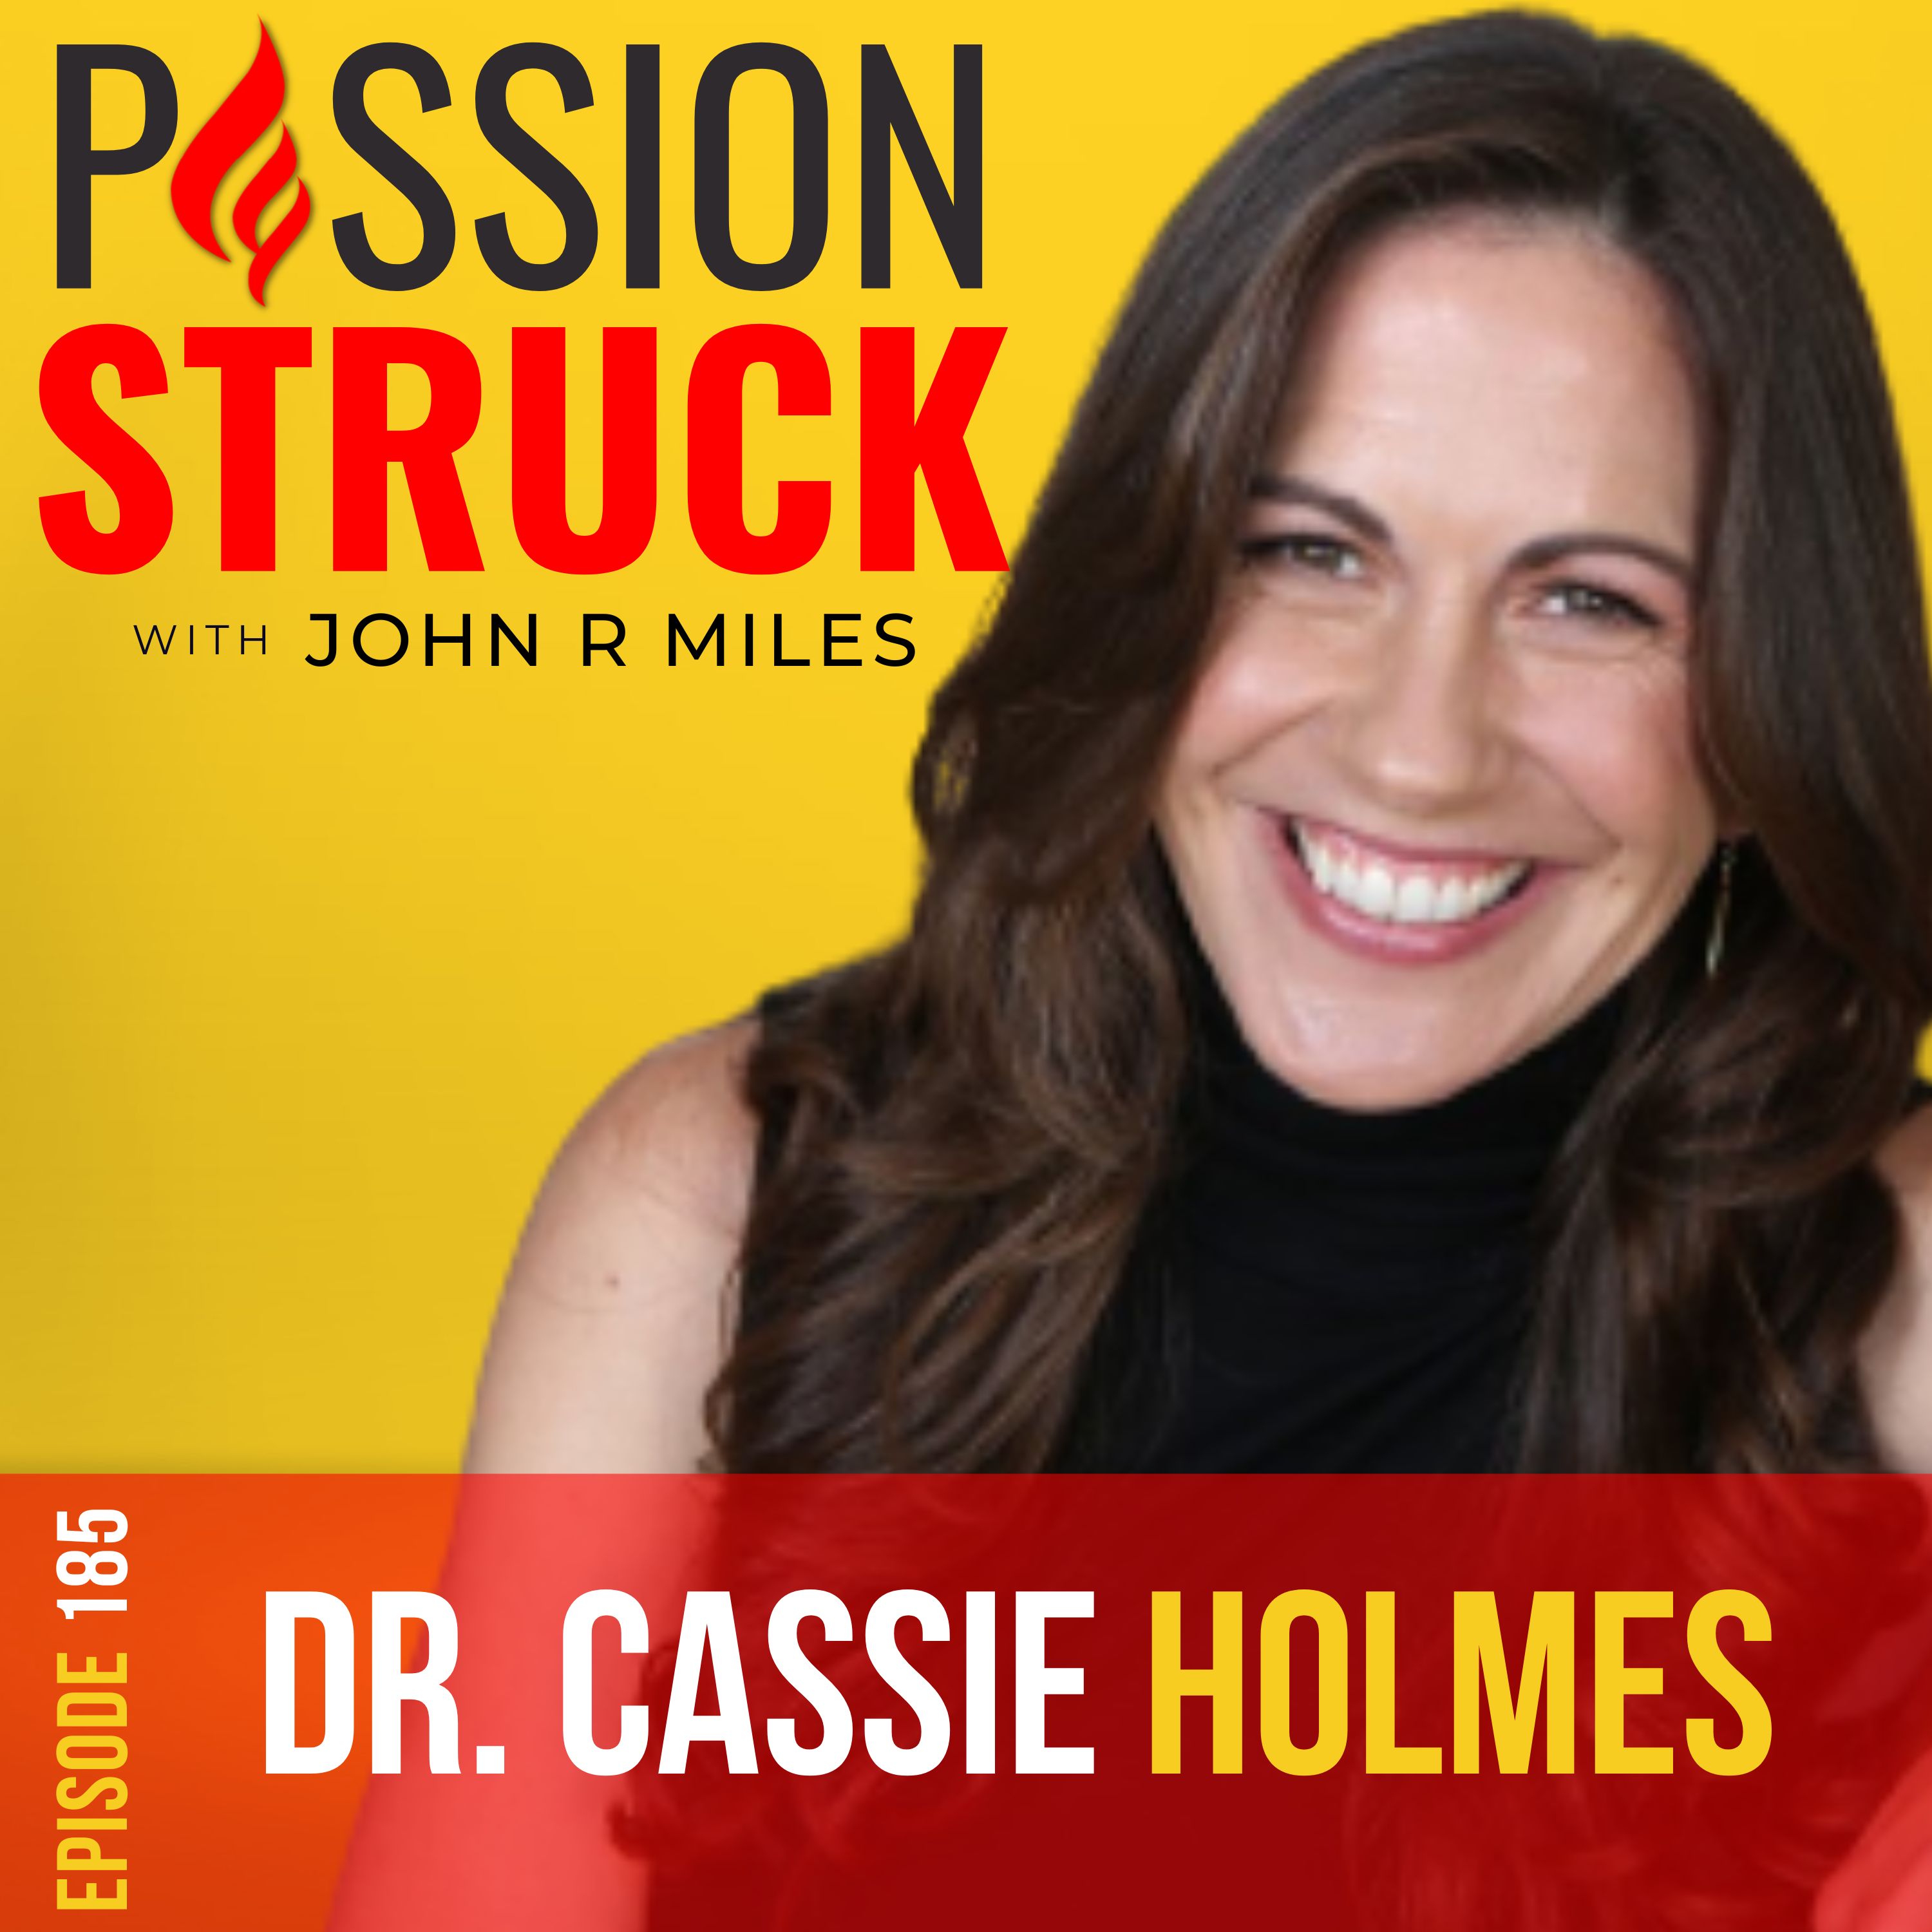 Passion Struck with John R. Miles album cover episode 185 with Dr. Cassie Holmes about Happier Hour